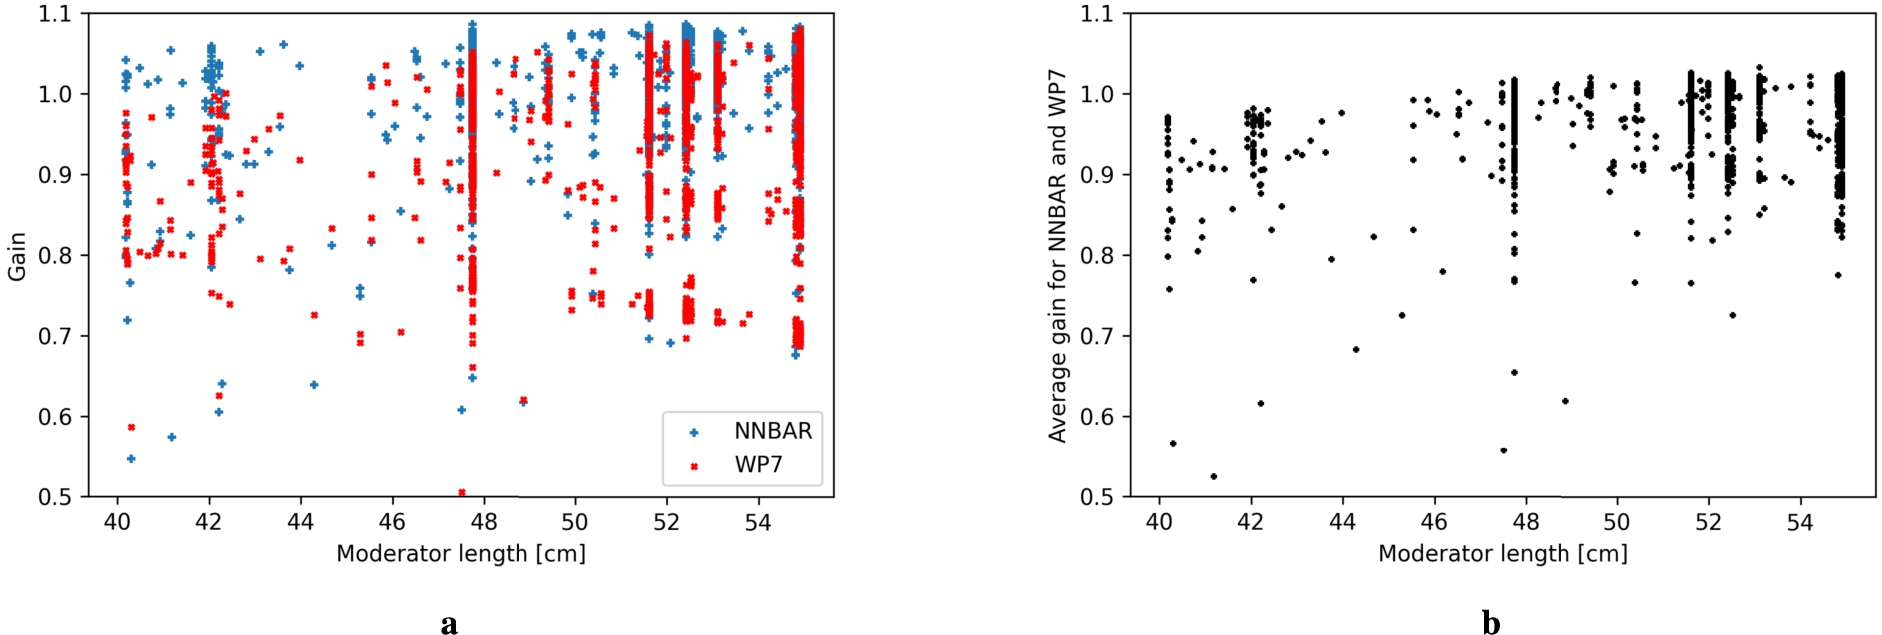 Performance of models with respect to moderator length. (A) gain in NNBAR and WP7 FOMs with respect to the baseline model. (B) average gain in NNBAR and WP7 FOM with respect to the baseline model.